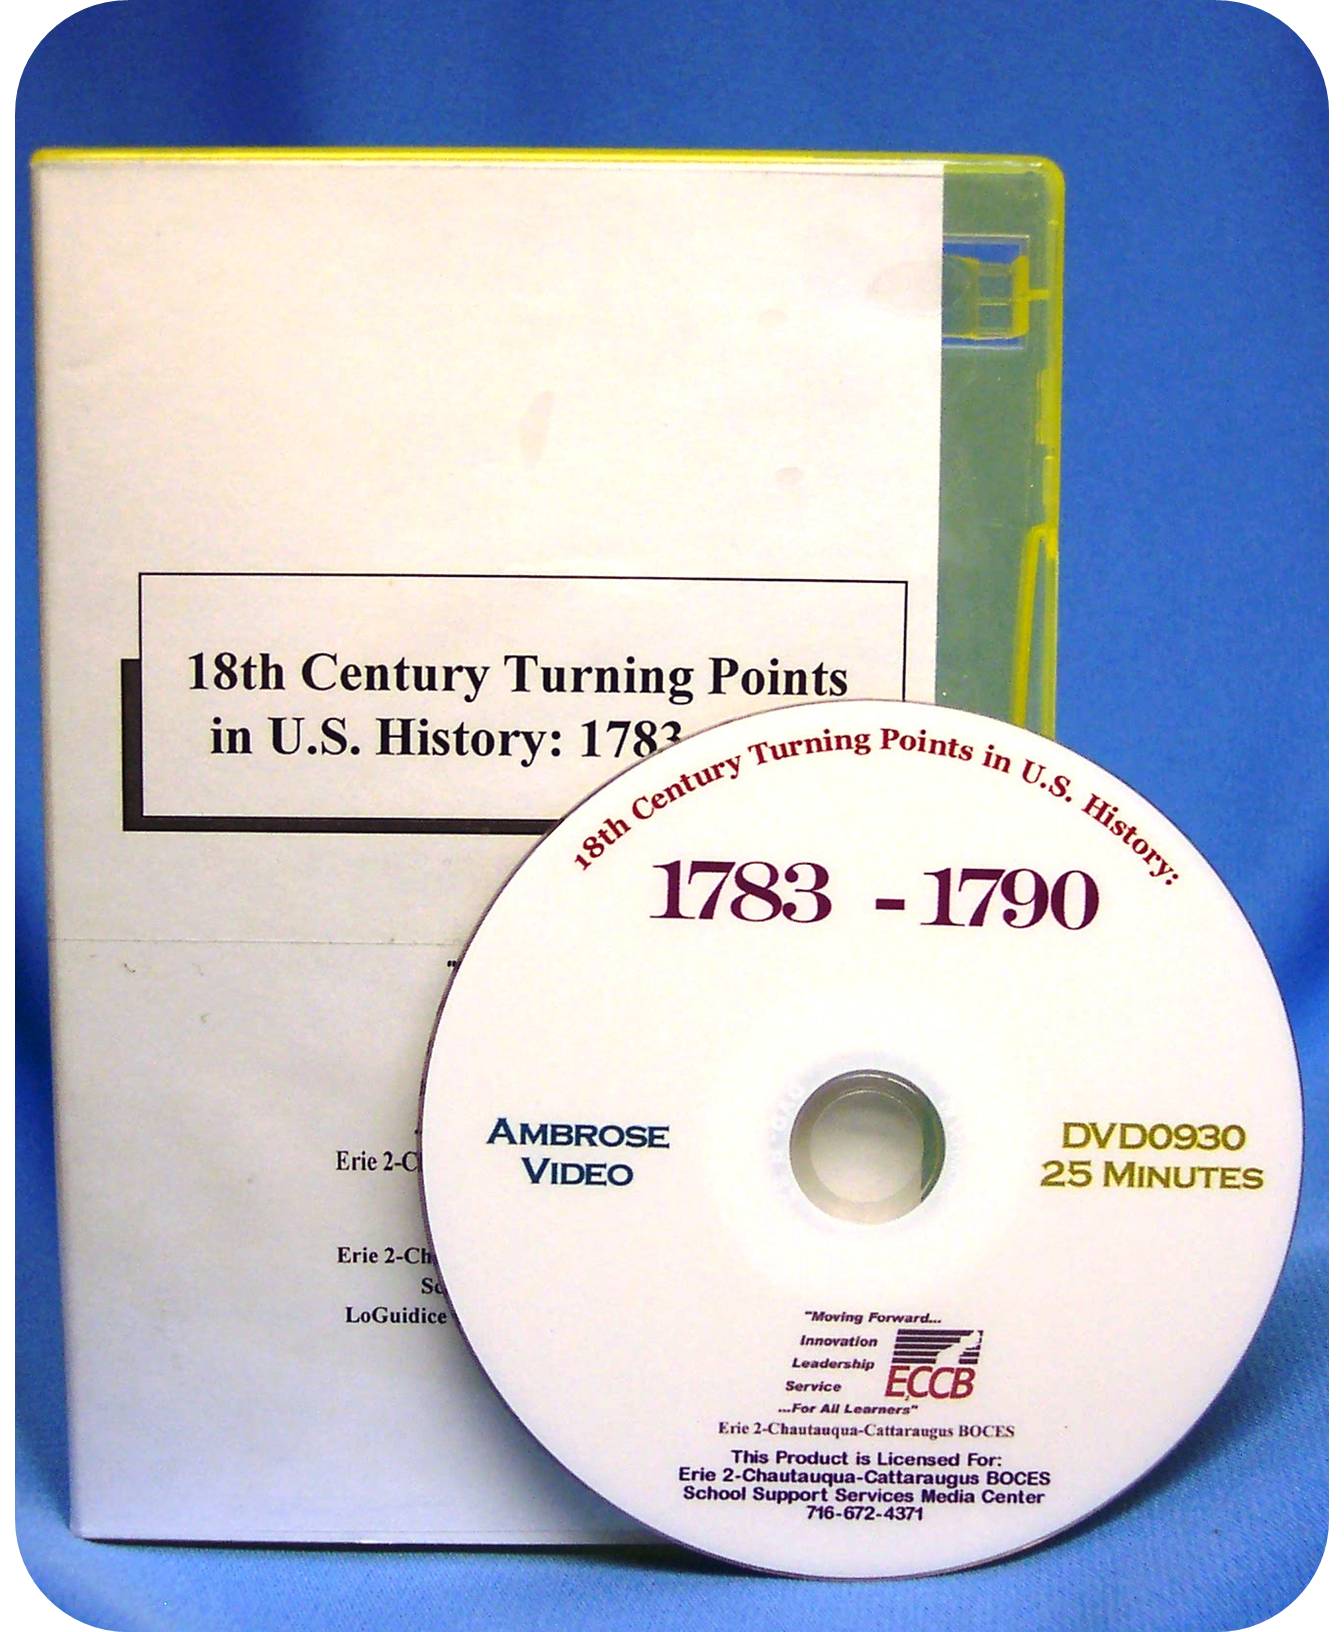 18th Century Turning Points in U.S. History: 1783- 1790